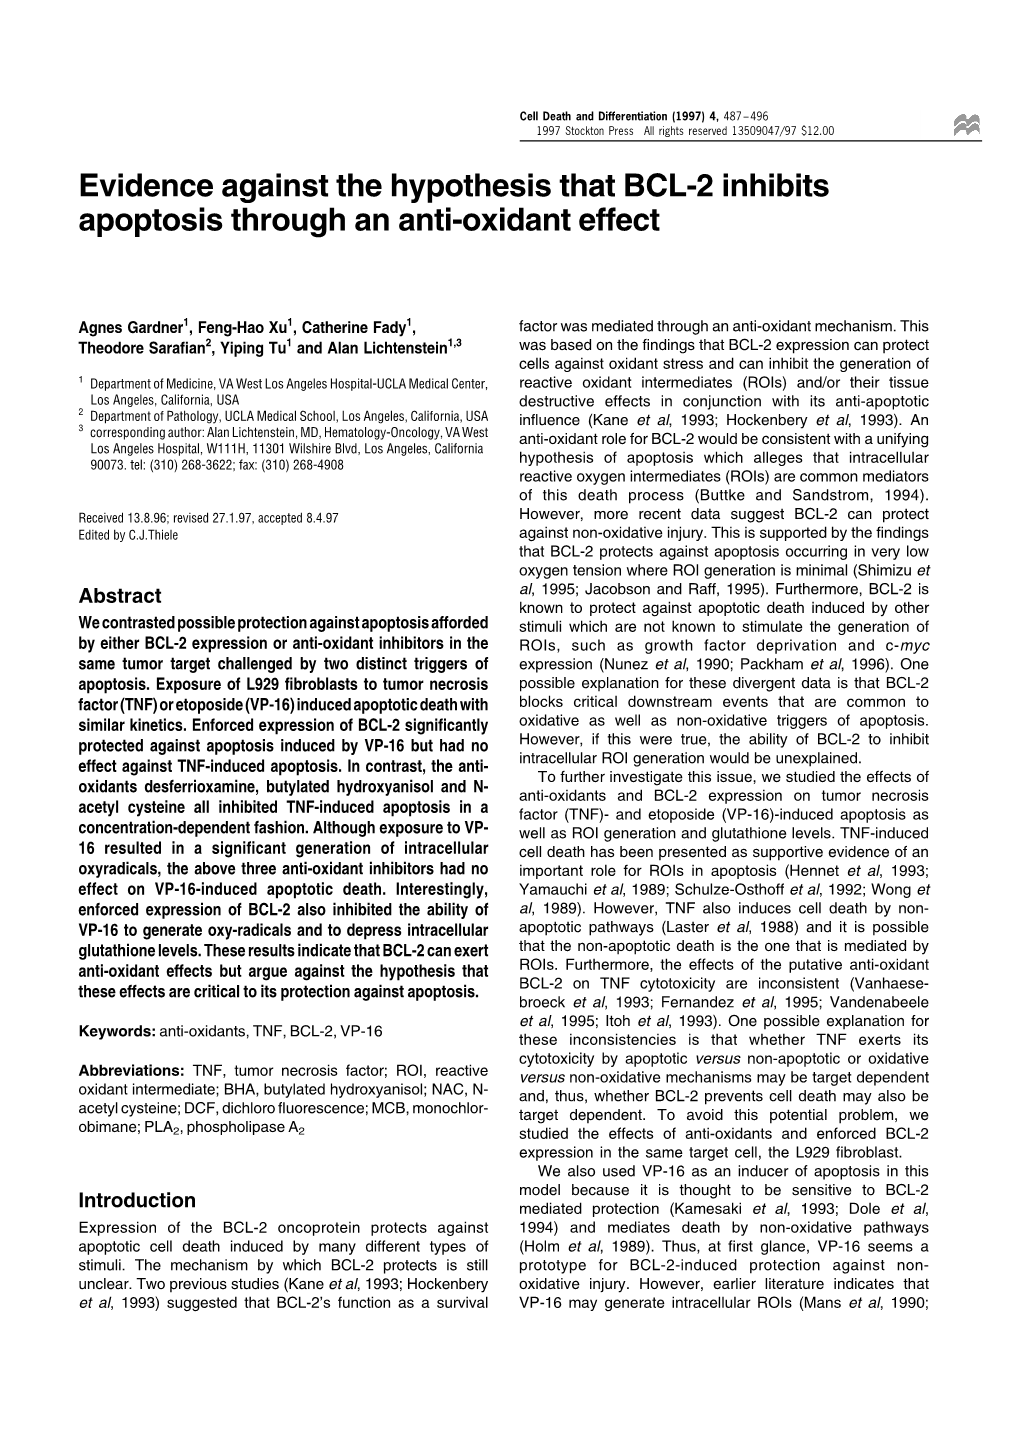 Evidence Against the Hypothesis That BCL-2 Inhibits Apoptosis Through an Anti-Oxidant Effect